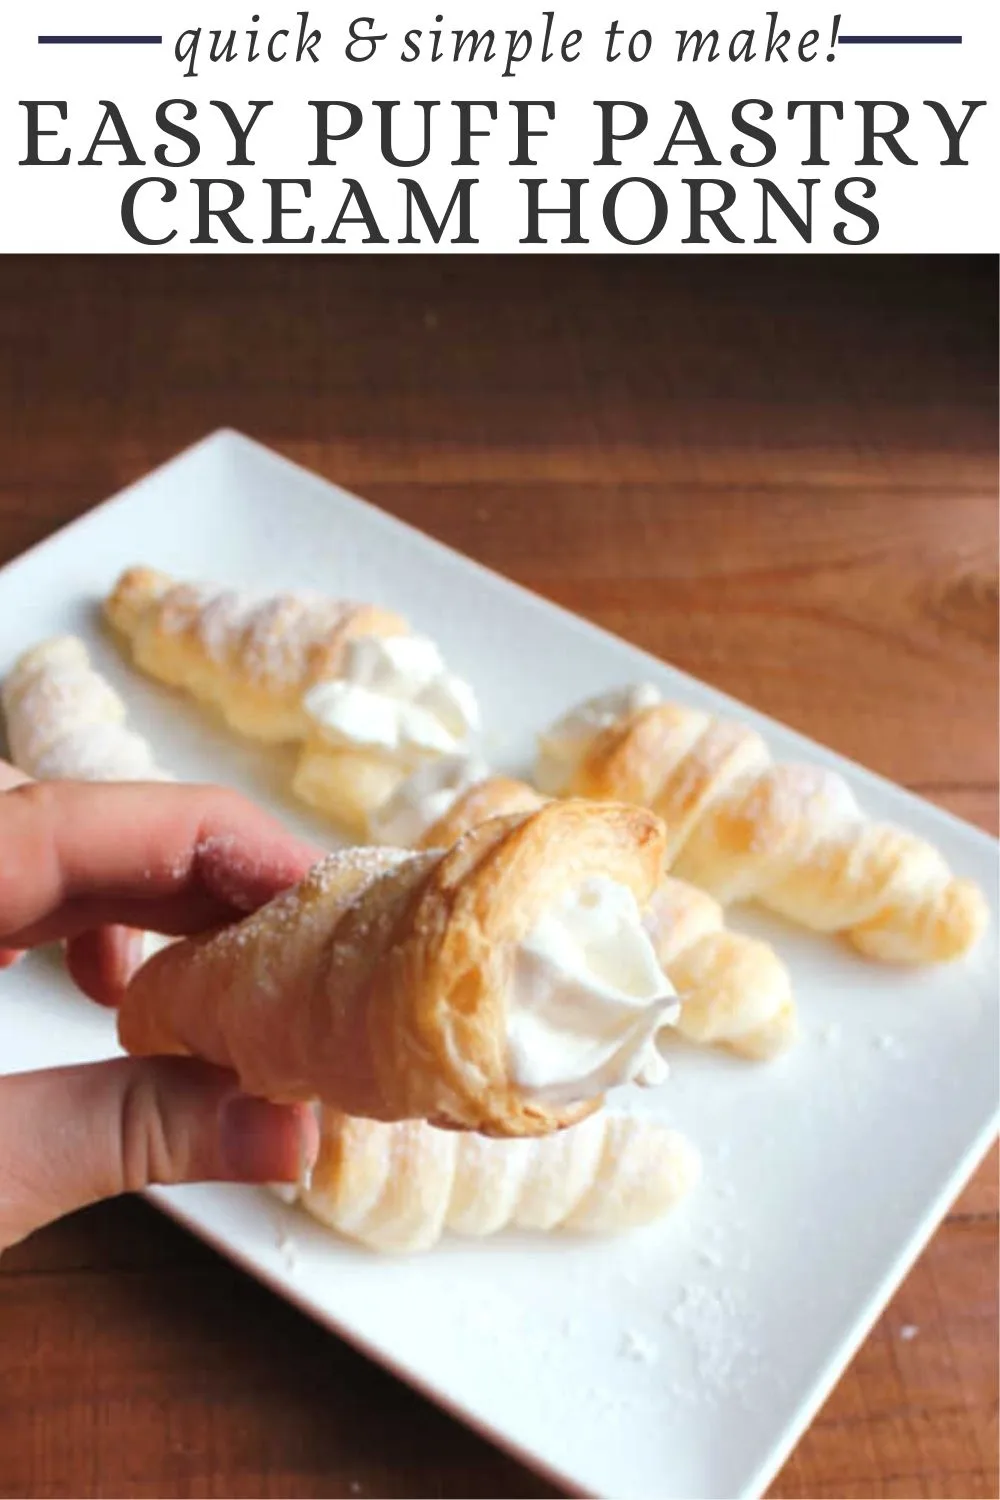 There is just something about the flaky simplicity of cream horns. When you make them yourself you can fill them with whatever you want, so that is an added bonus. Luckily they don't take much effort to put together and the process is kind of fun. You should try it for yourself!